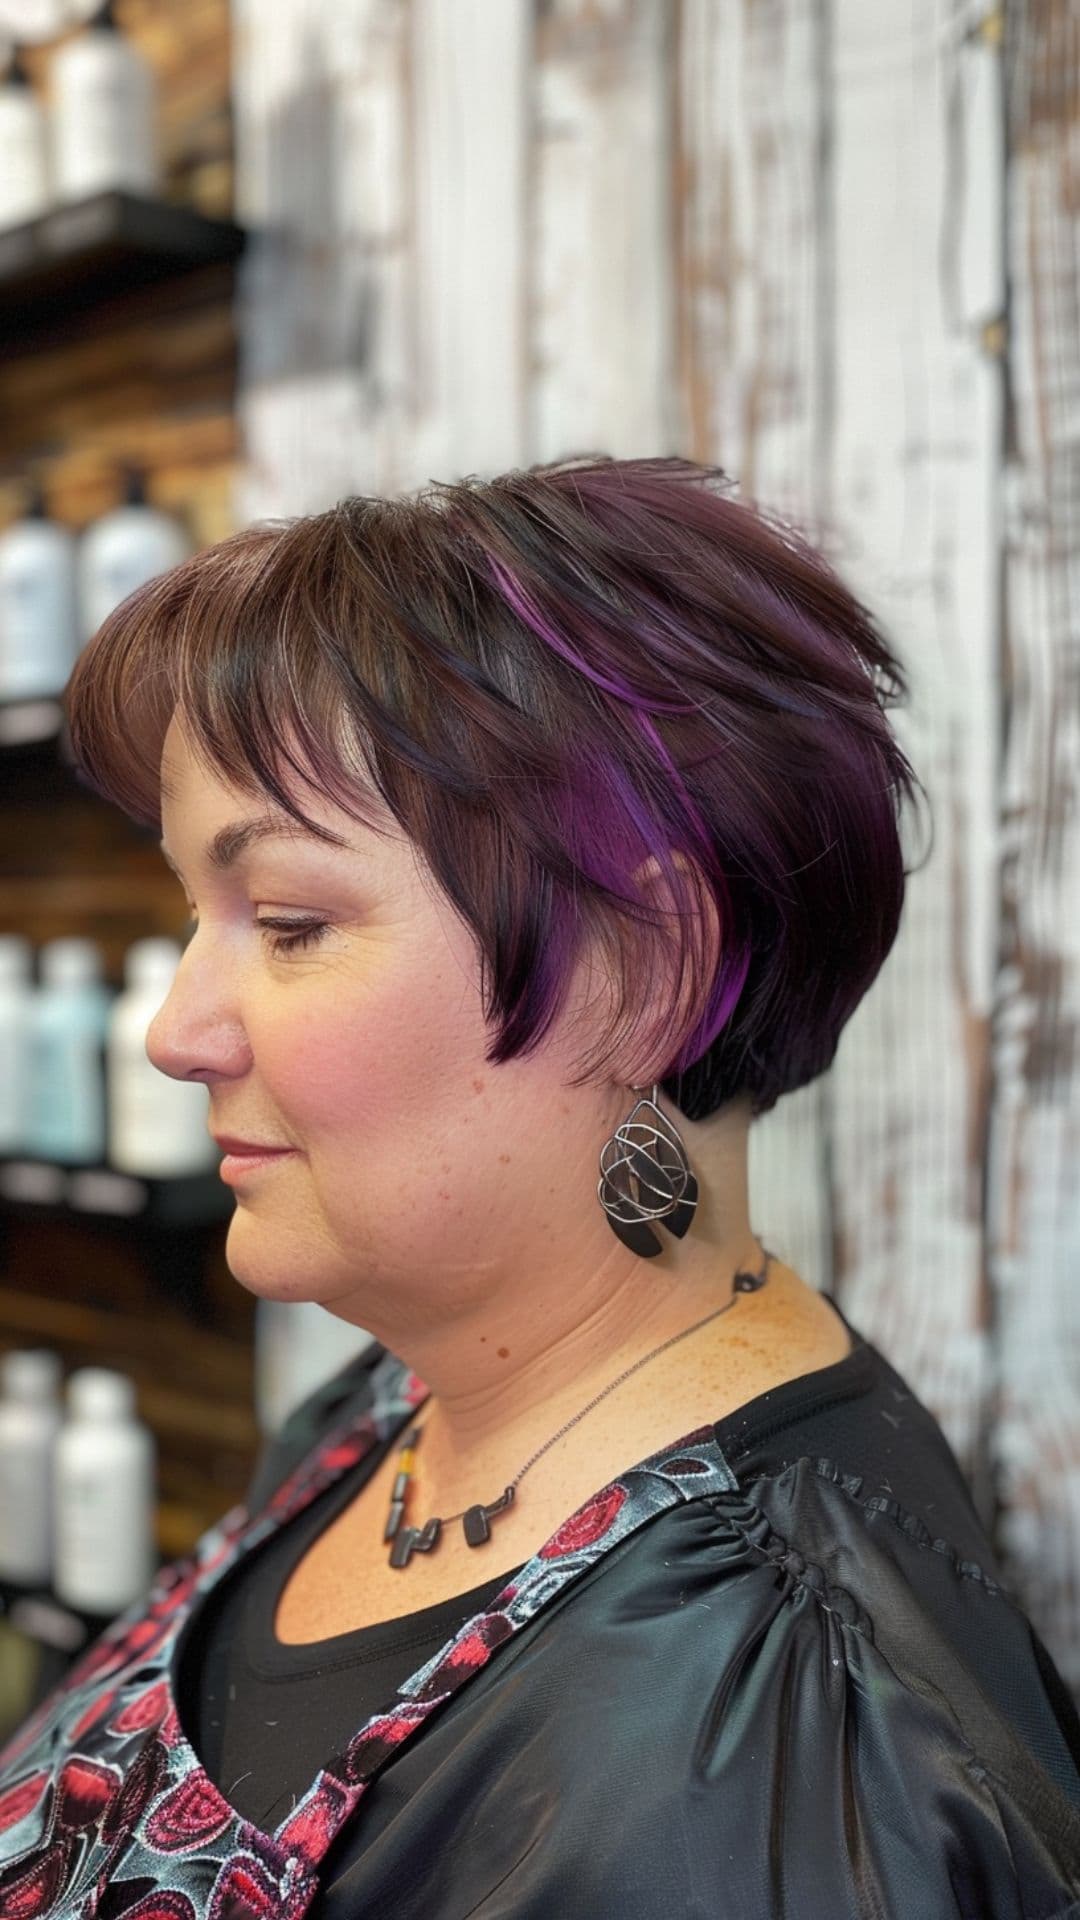 A old woman modelling a pixie bob cut with purple accents.